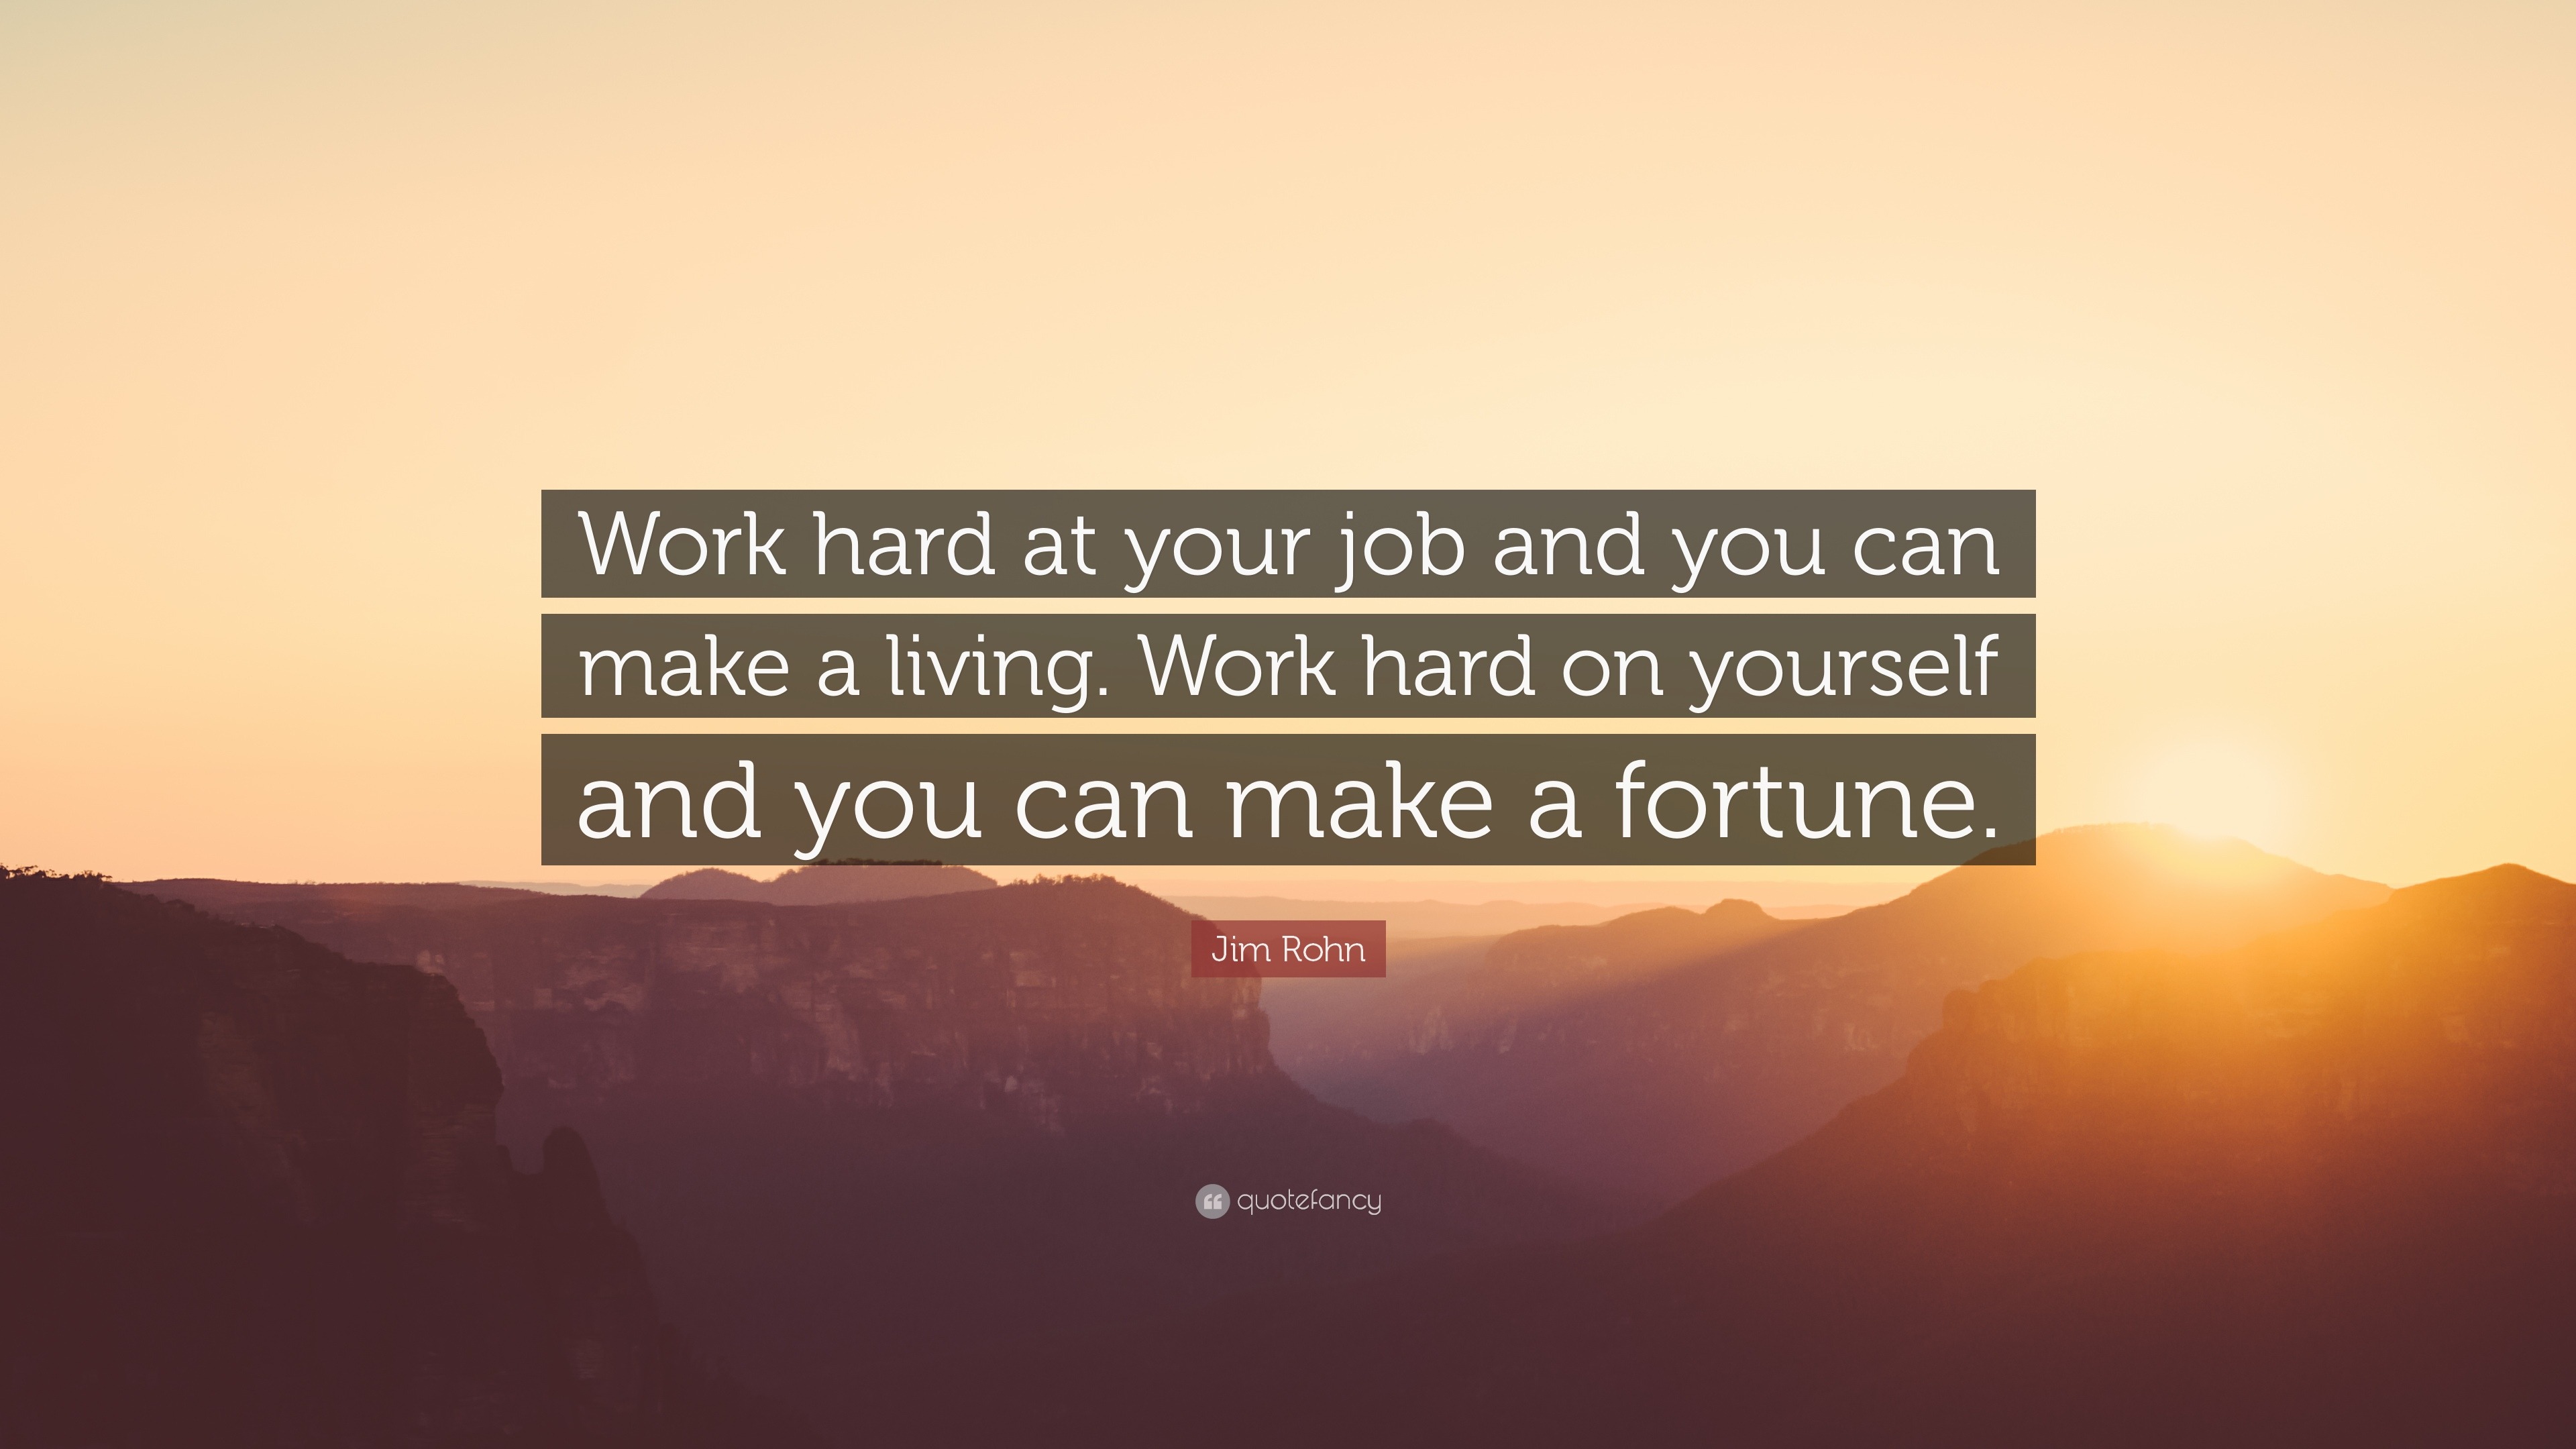 14427 Jim Rohn Quote Work hard at your job and you can make a living